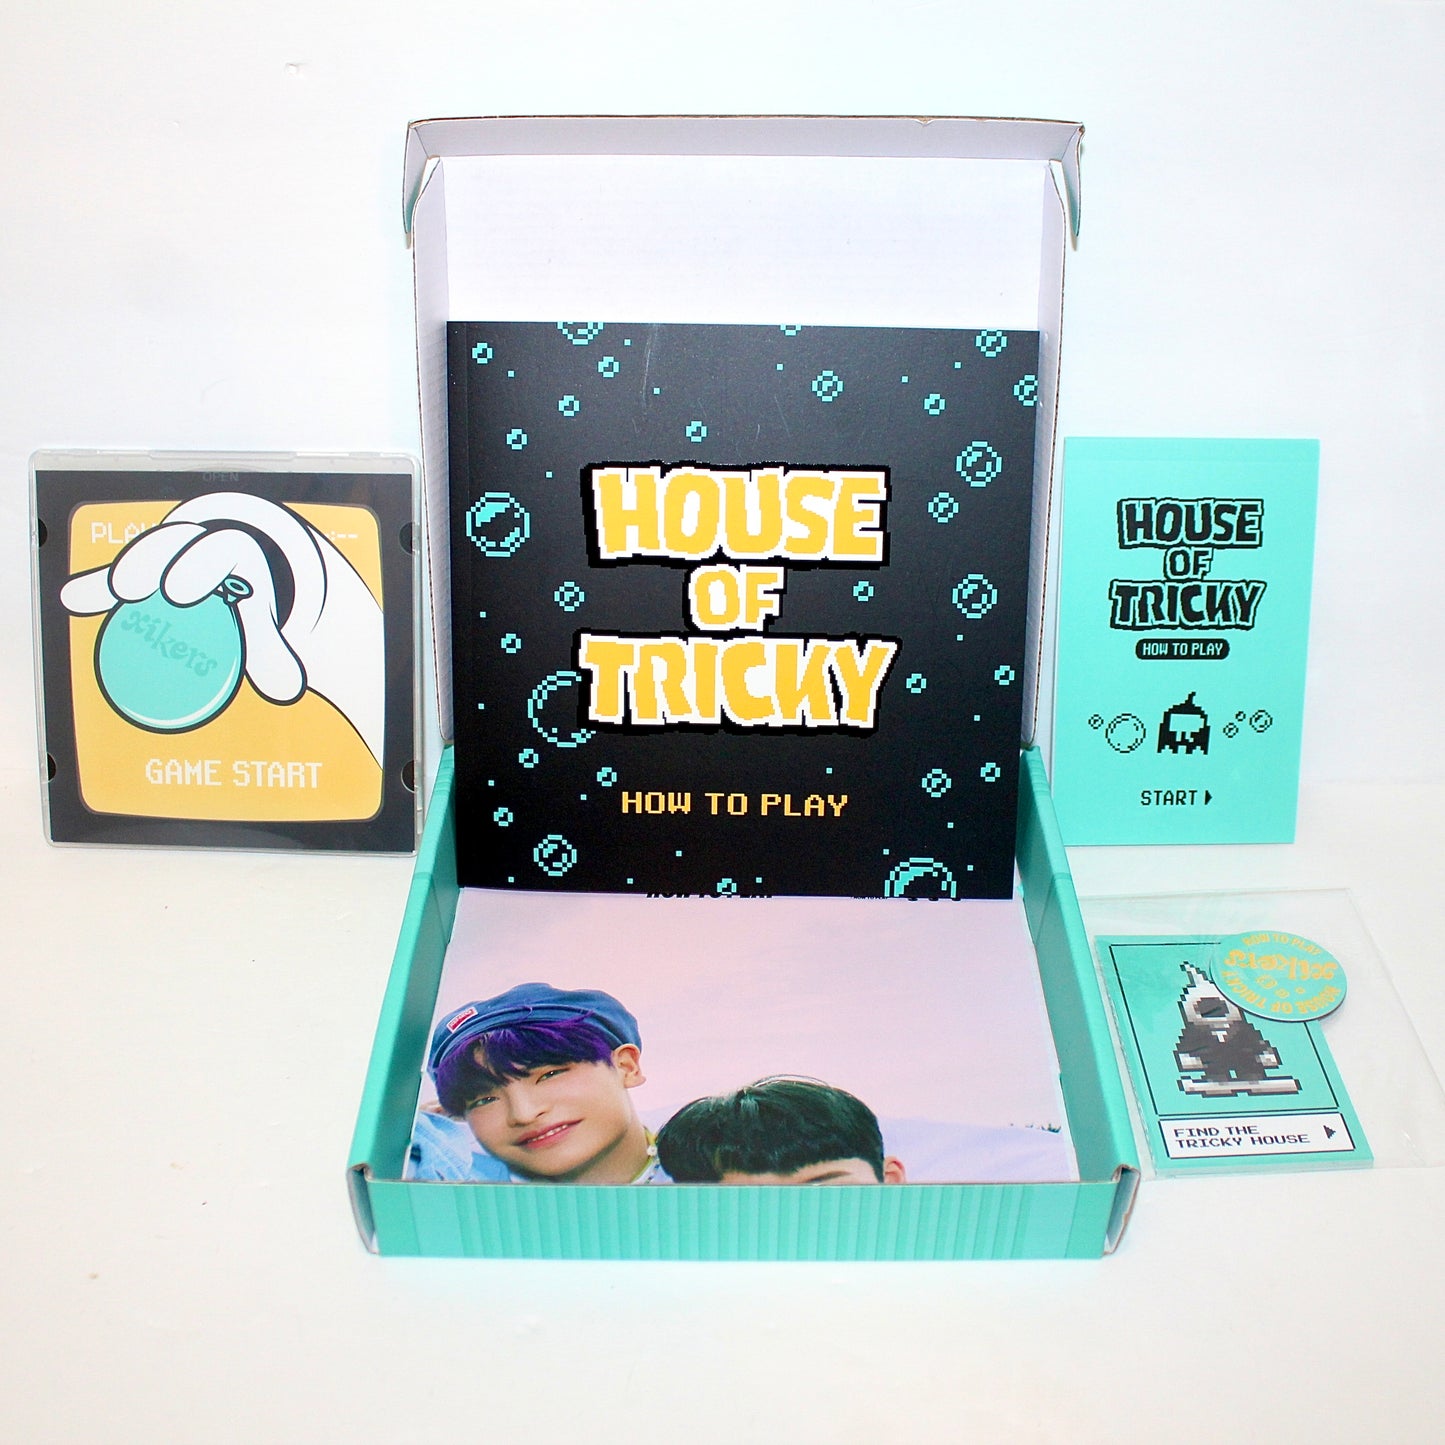 XIKERS 2nd Mini Album - House of Tricky: How to Play | Hiker Ver.